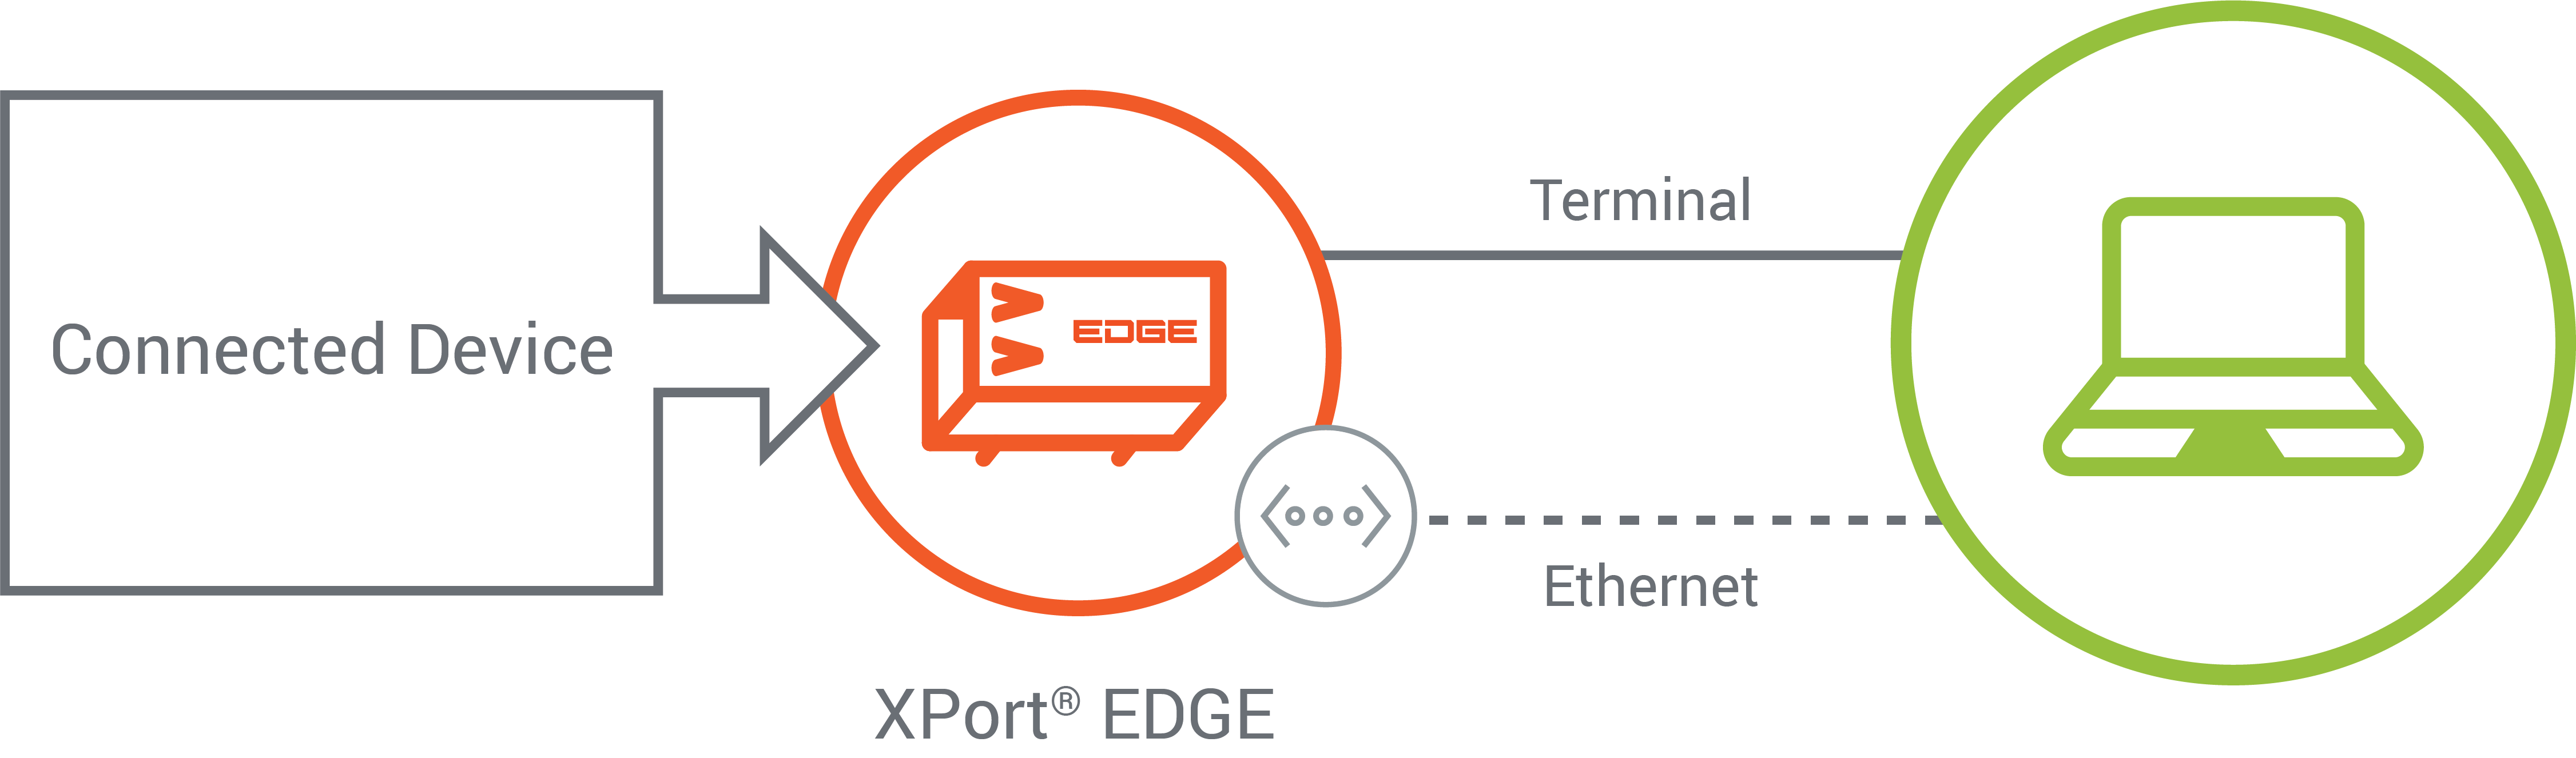 Connect to XPort EDGE Embedded Ethernet Gateway